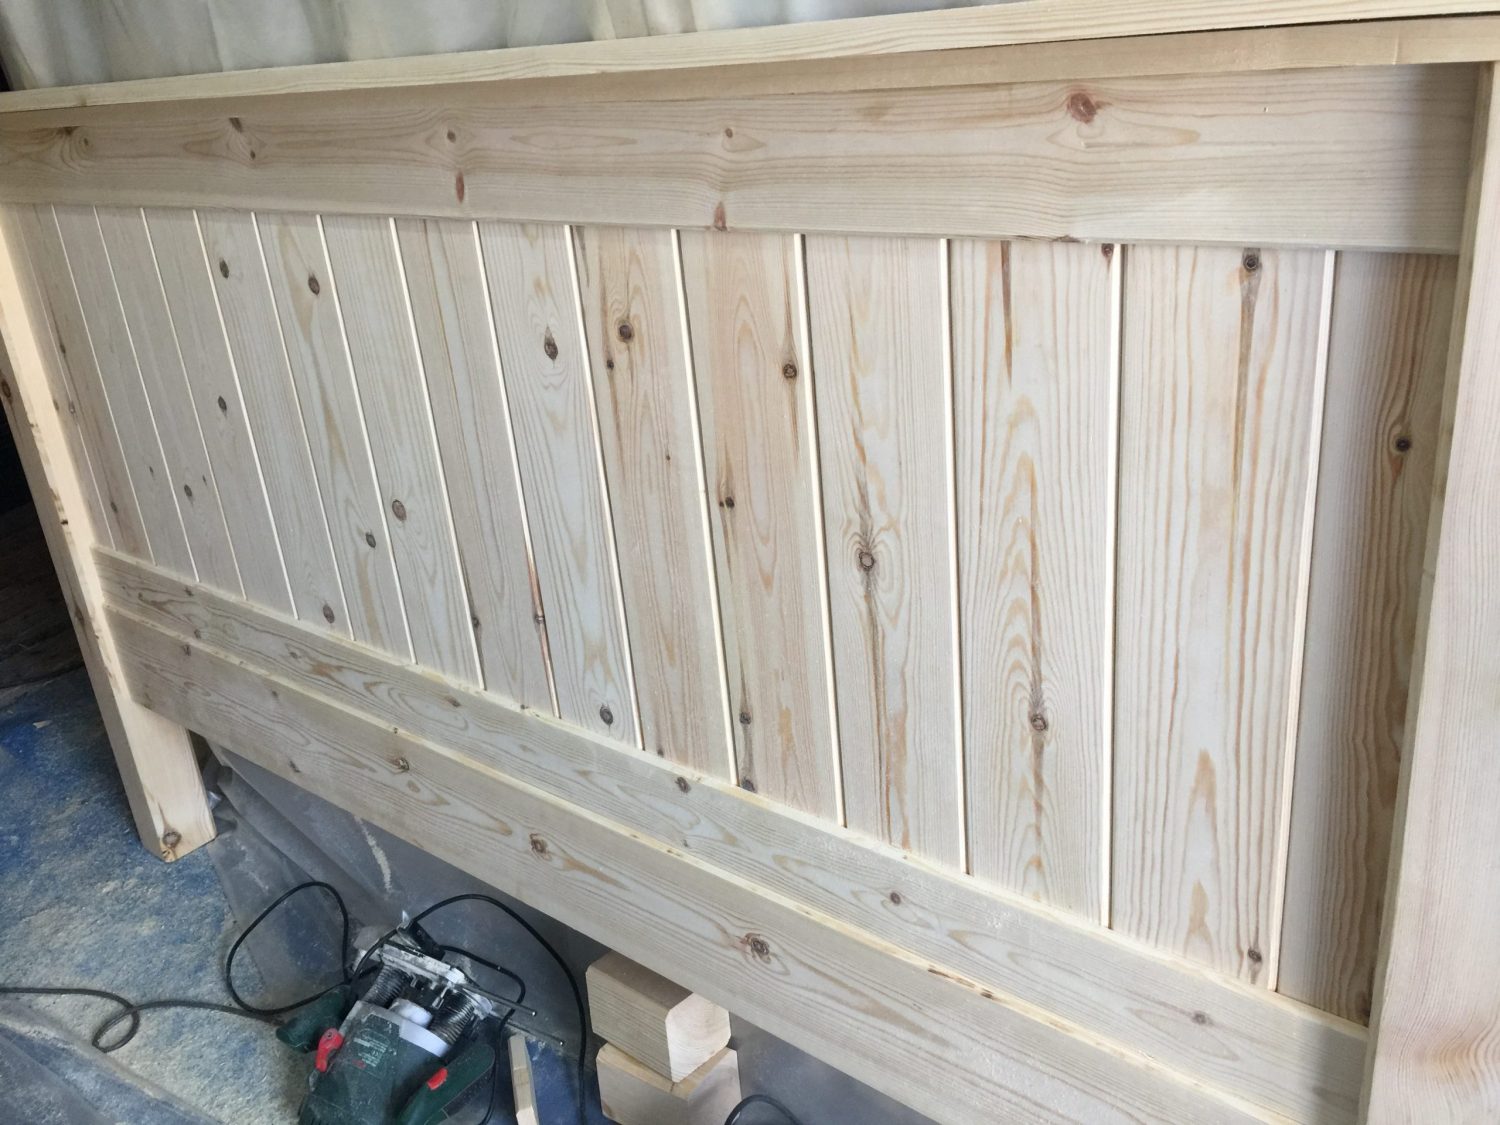 The headboard basically finished fort the Pine Bed